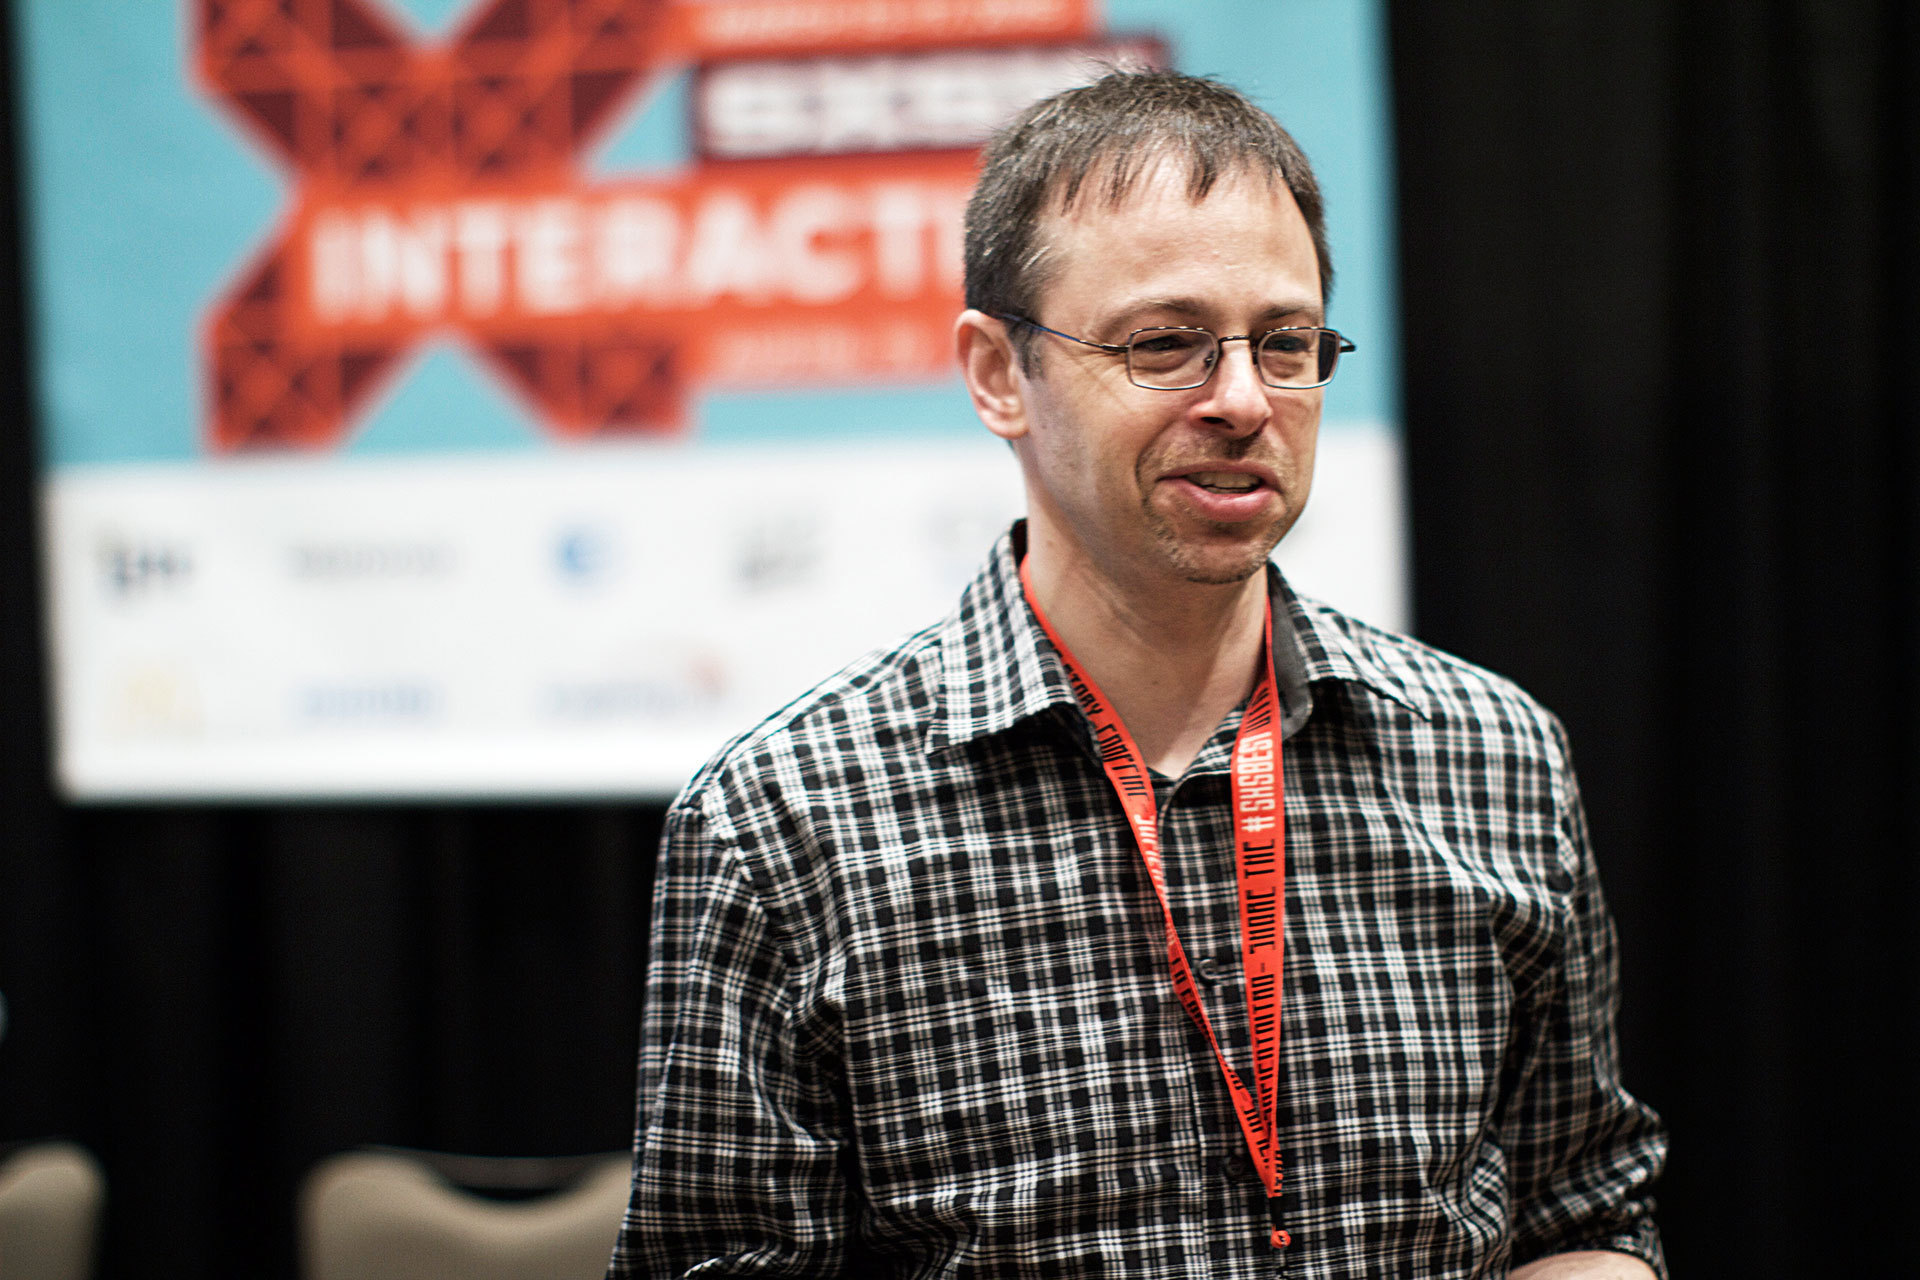 Brian Cugelman presenting at his SXSW 2015 workshop: "Psychological Architectures for Persuasive Tech".